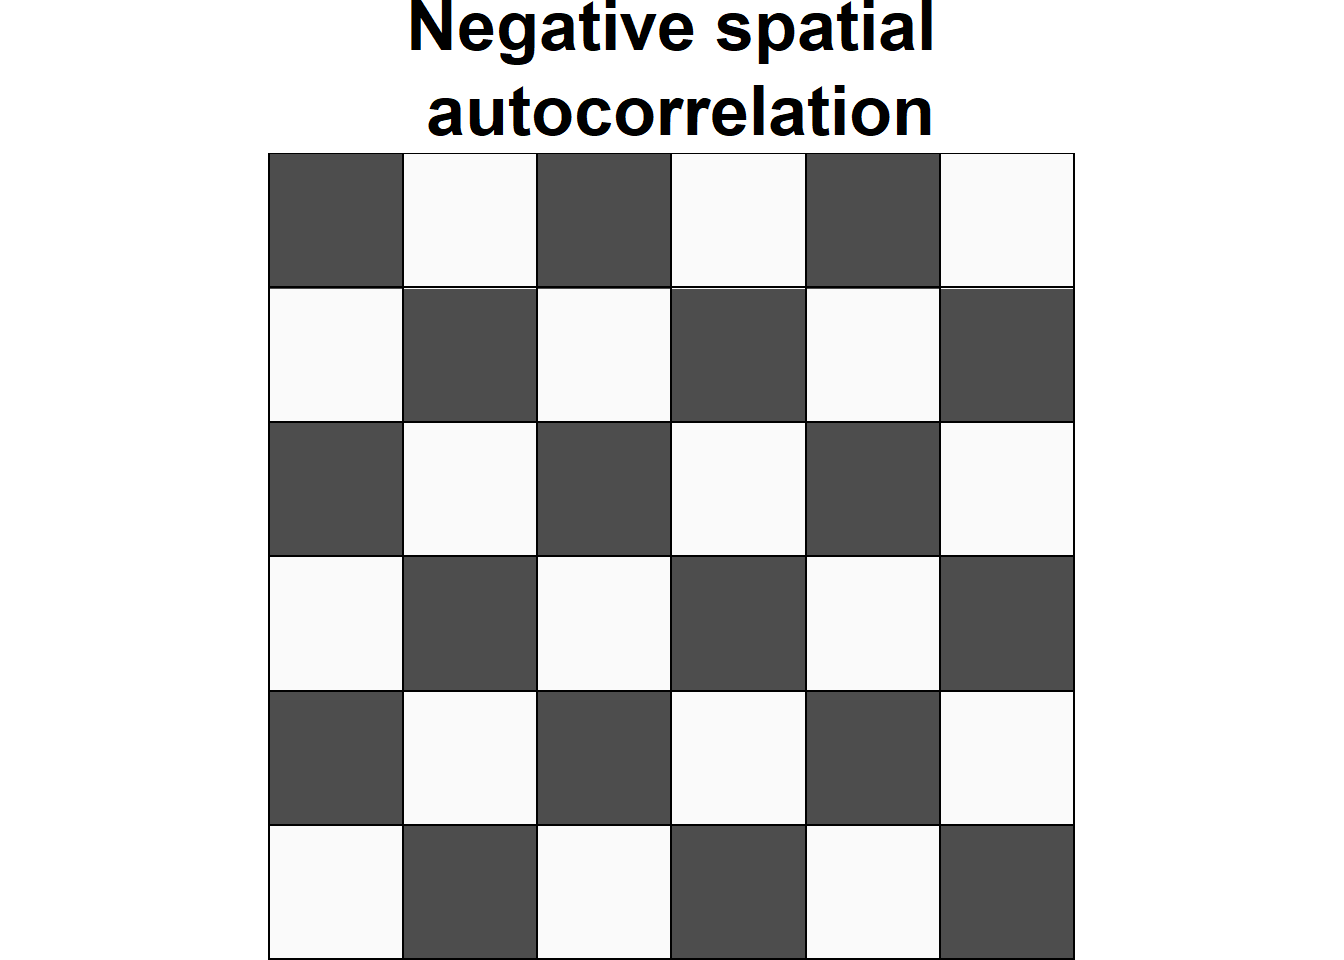 Examples of configurations of areas showing different types of spatial autocorrelation.